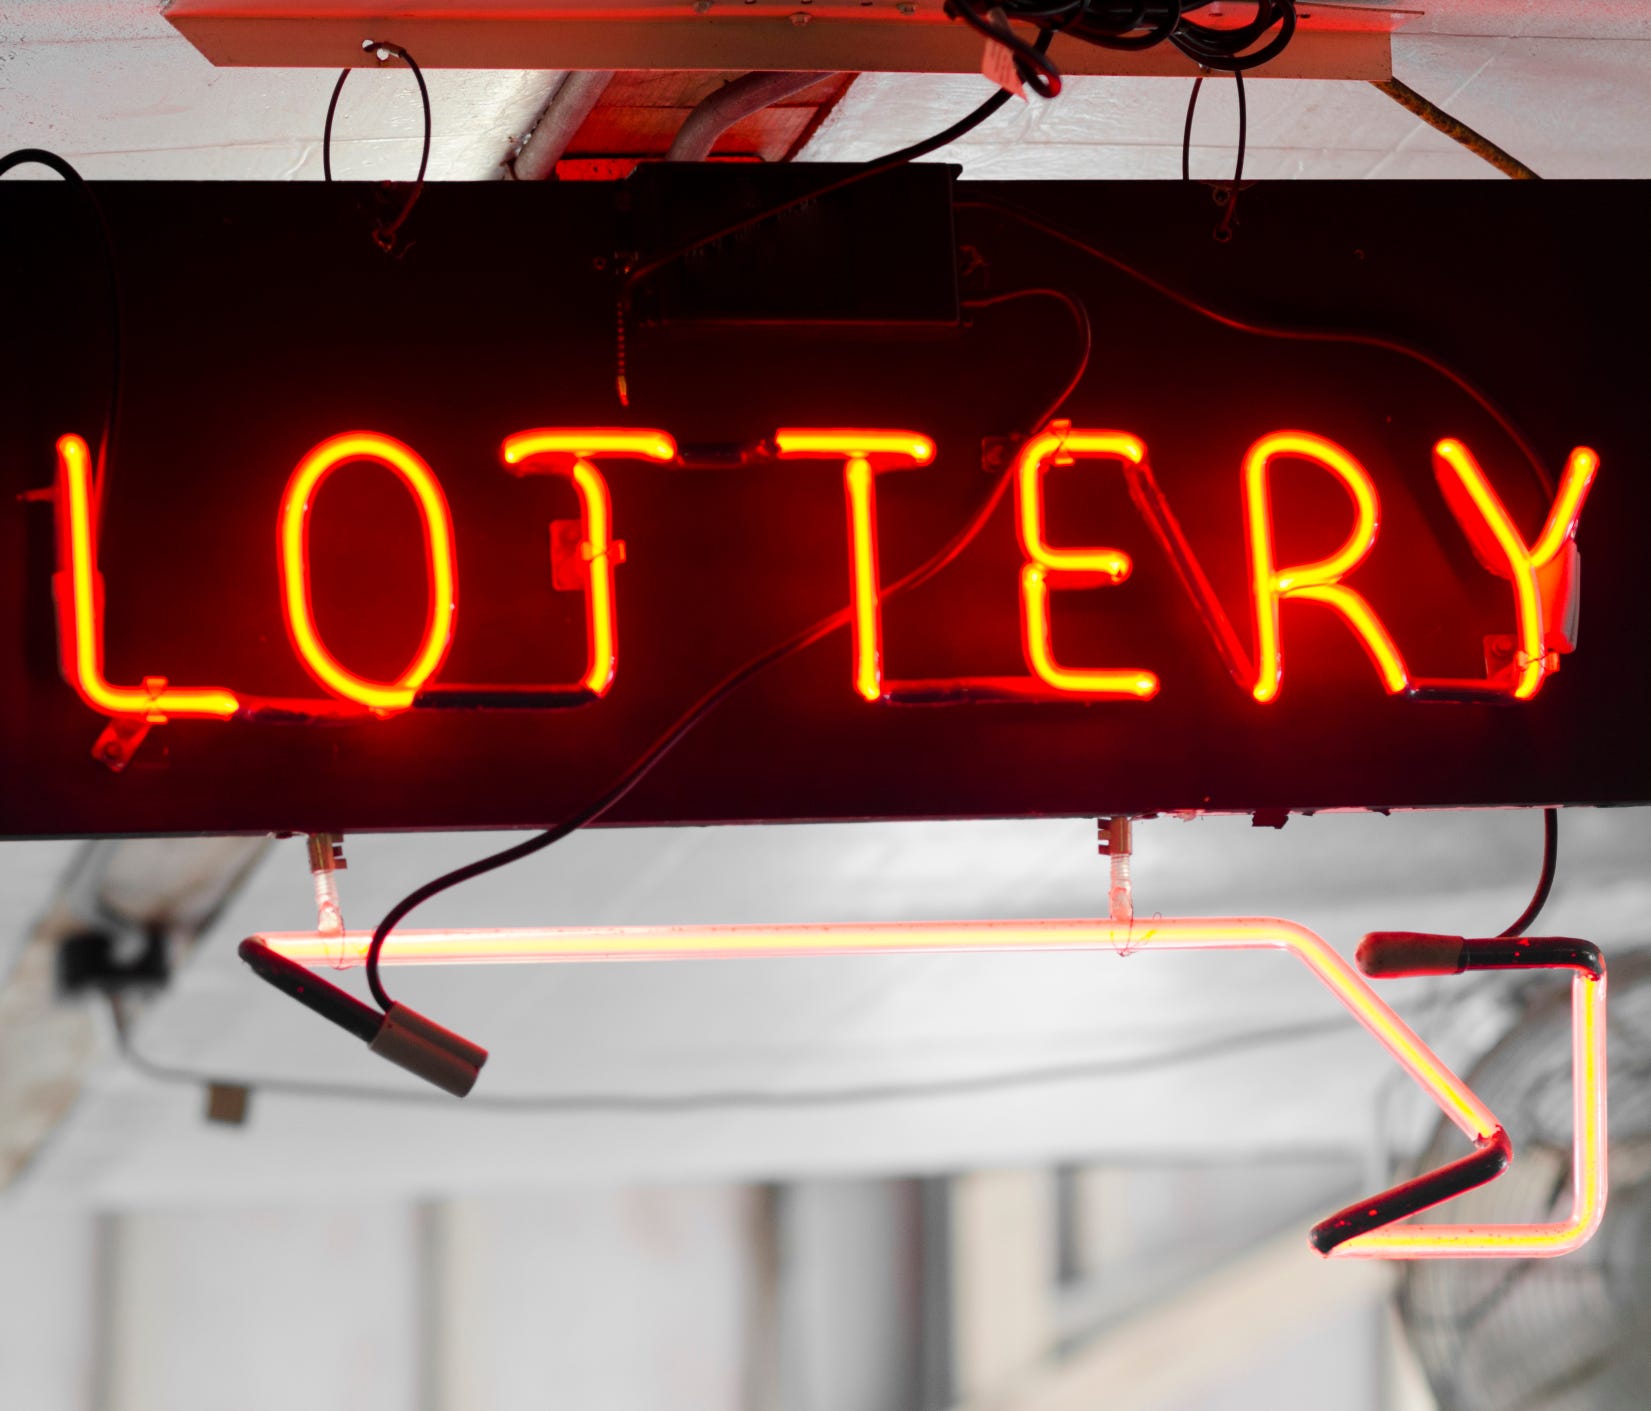 many people dream of winning the lottery.